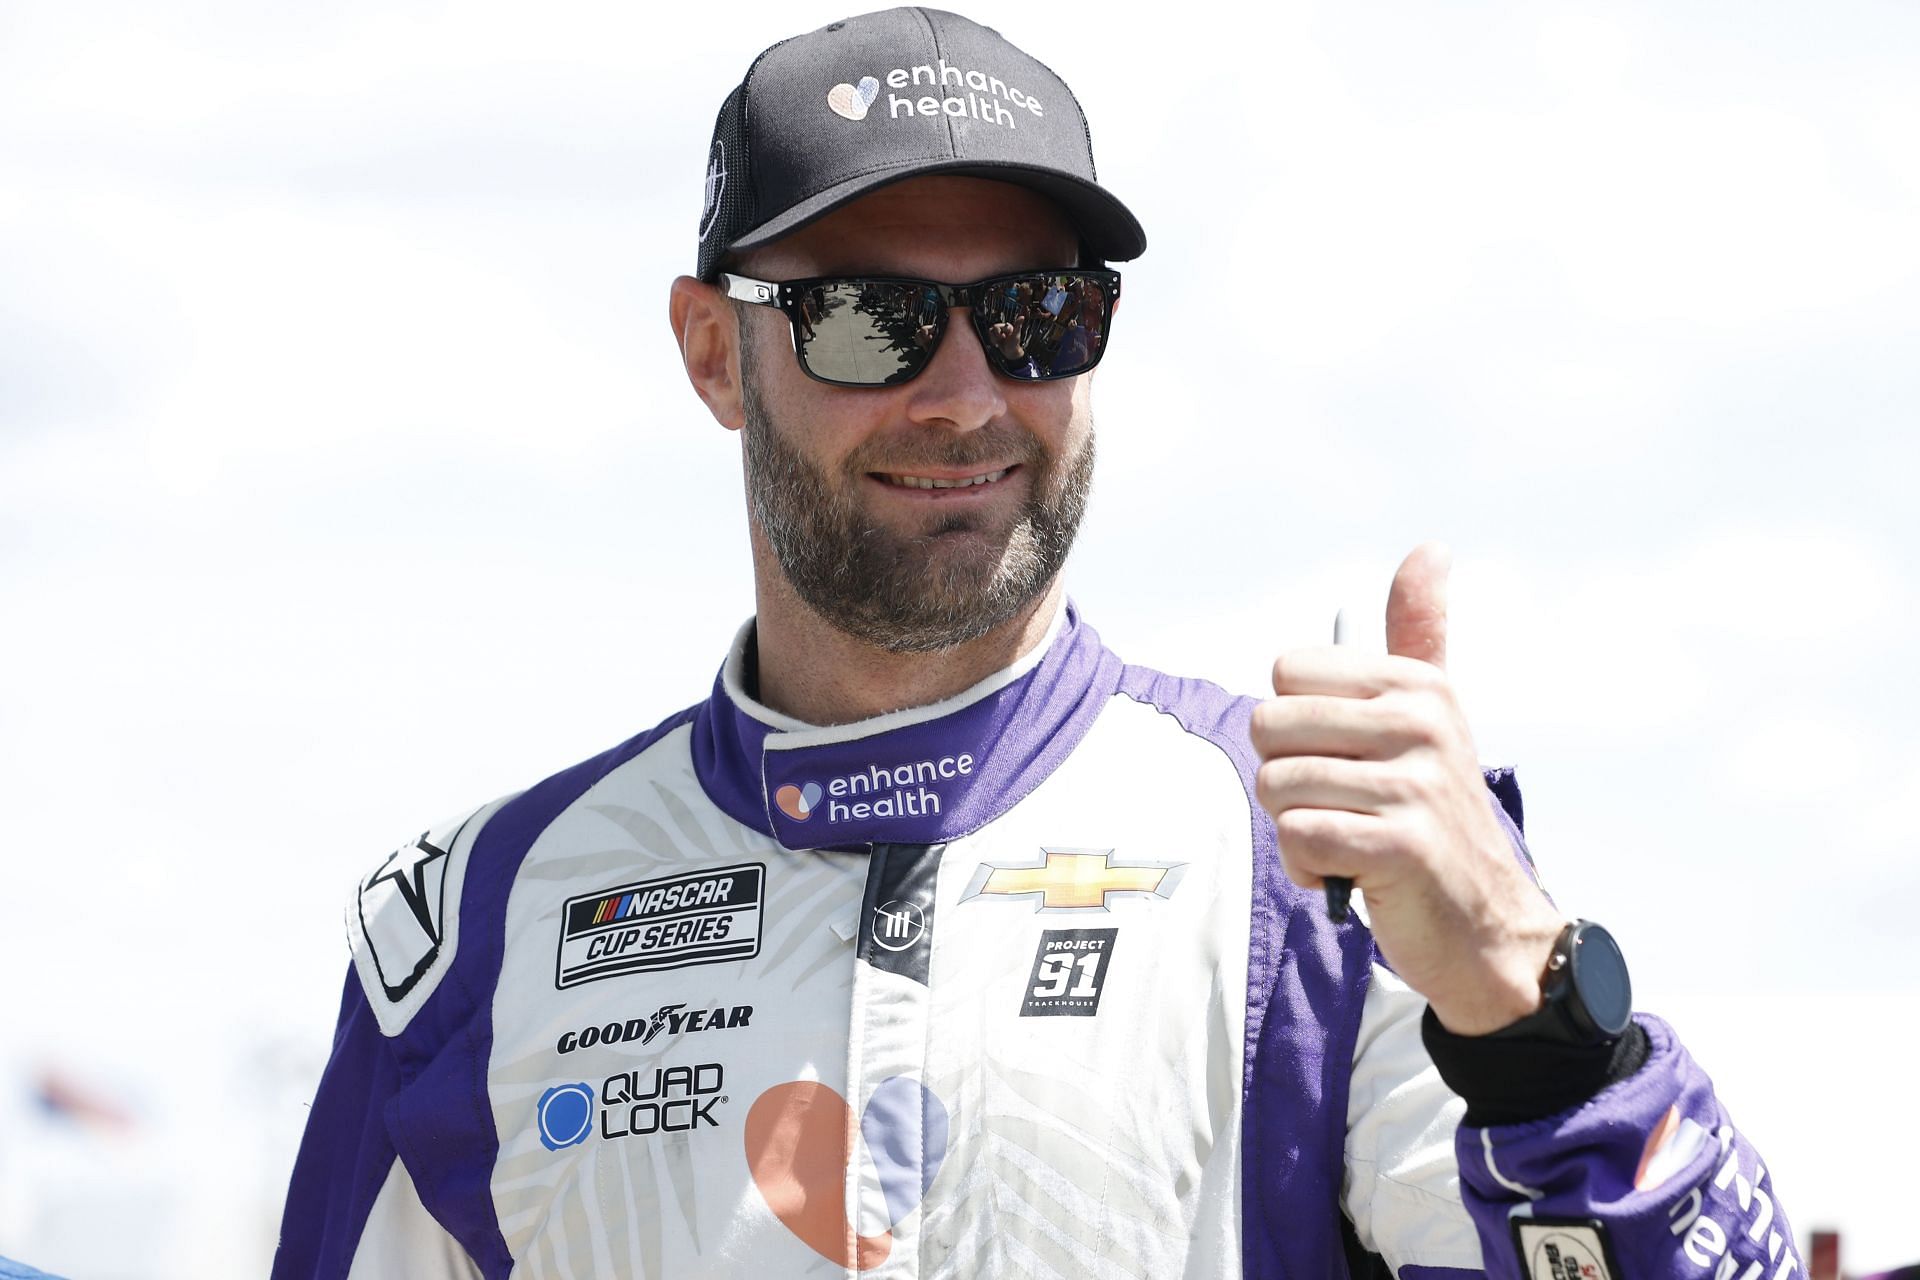 Shane van Gisbergen released from Supercars team but may not drive in